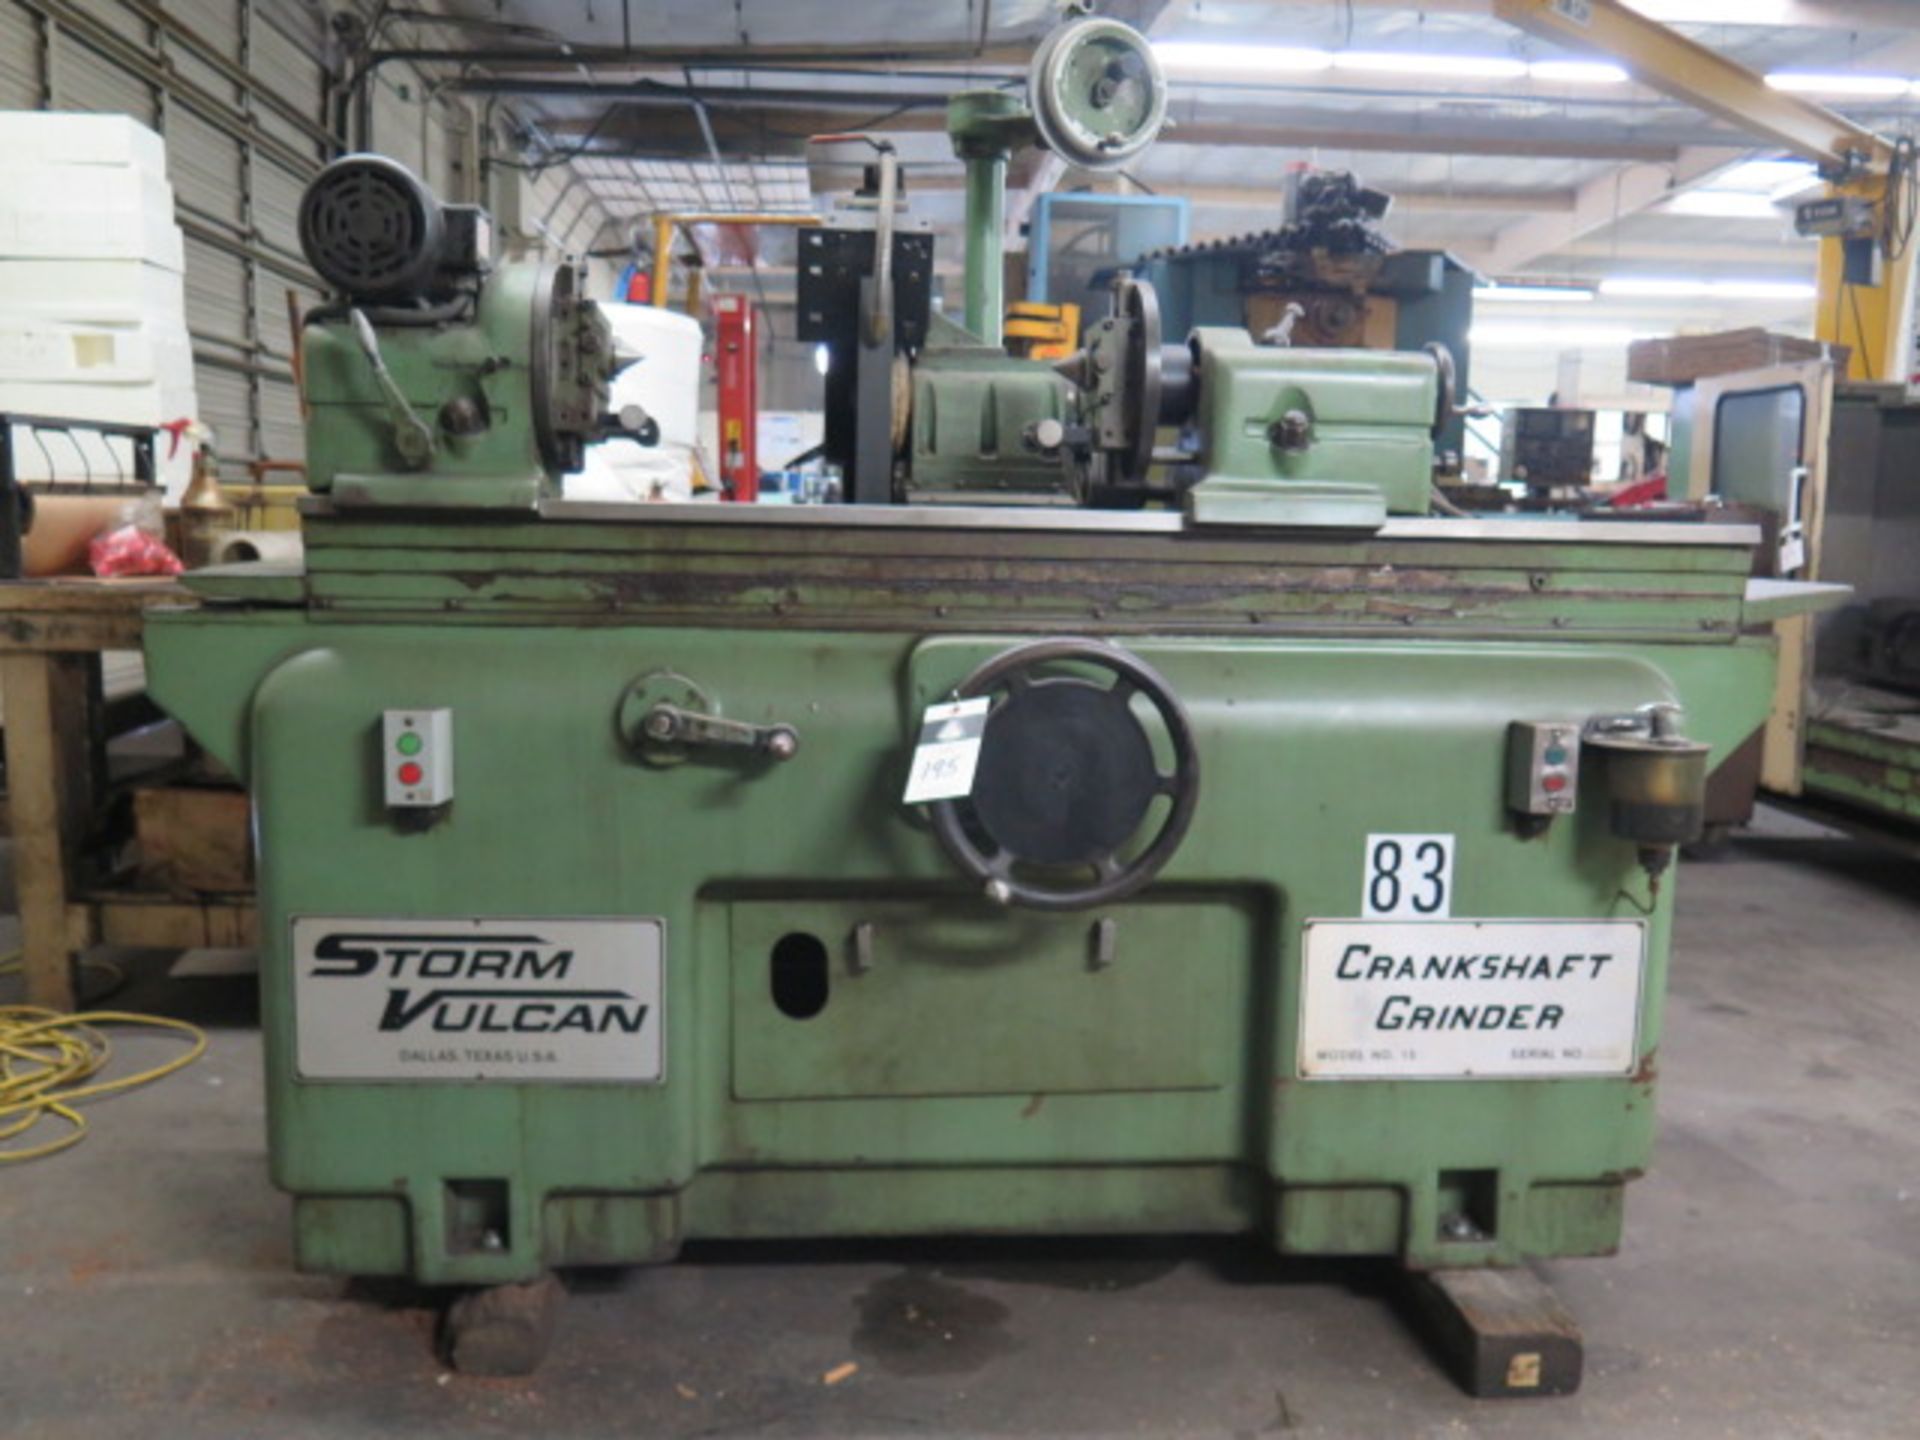 Storm Vulcan mdl. 15 Cam Shaft Grinder s/n 800-76 w/ Motorized Work Head, Tailstock, SOLD AS IS